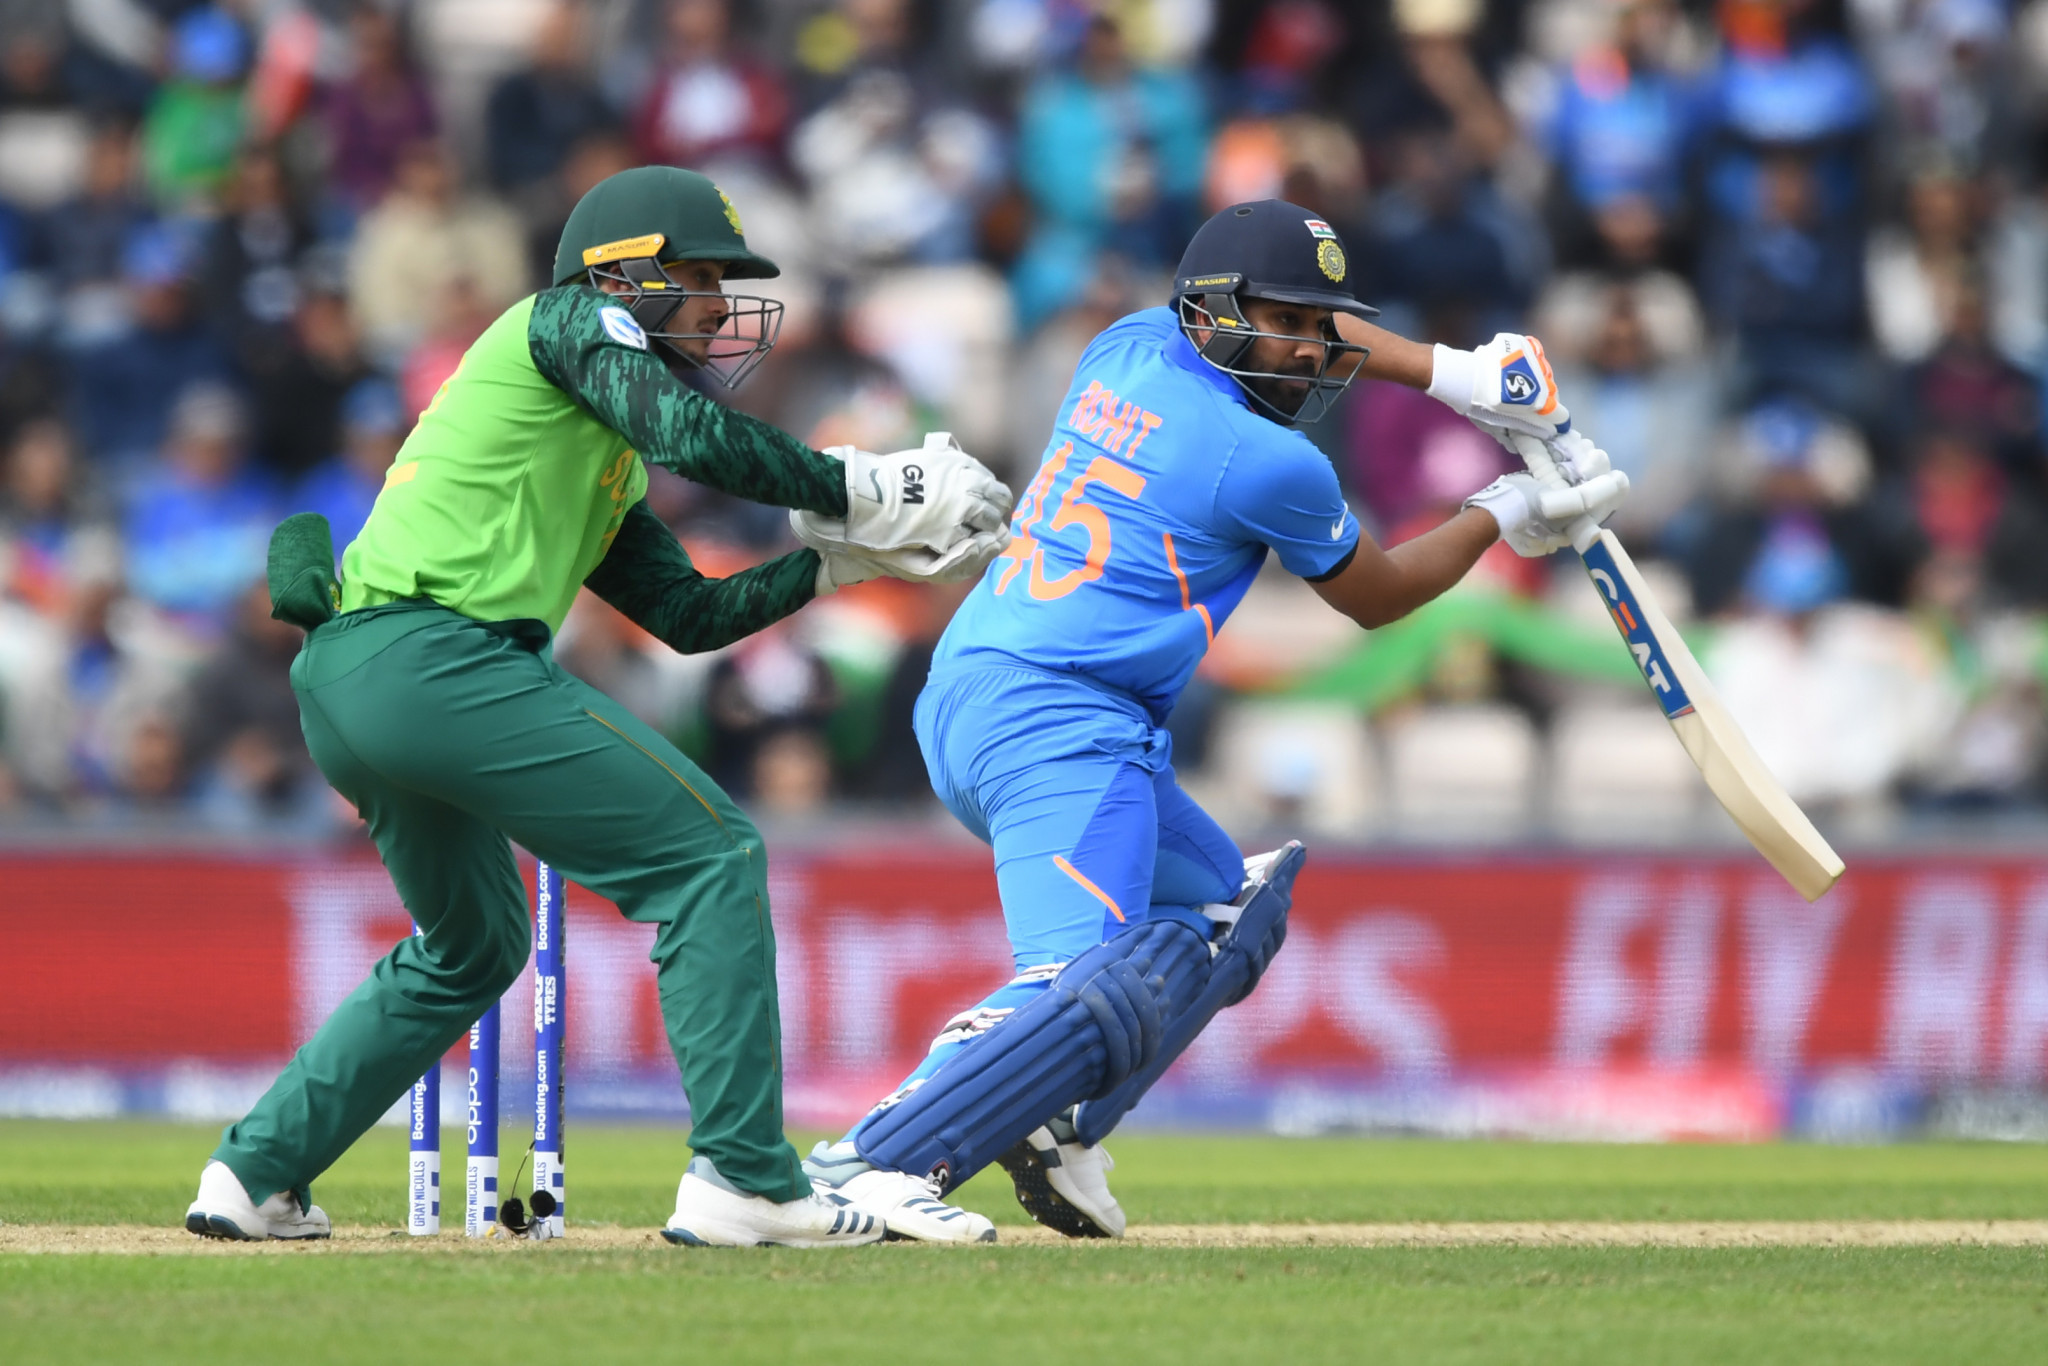 Rohit Sharma hit a century to guide India to victory in their opening match and leave South Africa's hopes of qualifying for the semi-finals hanging by a thread ©Getty Images